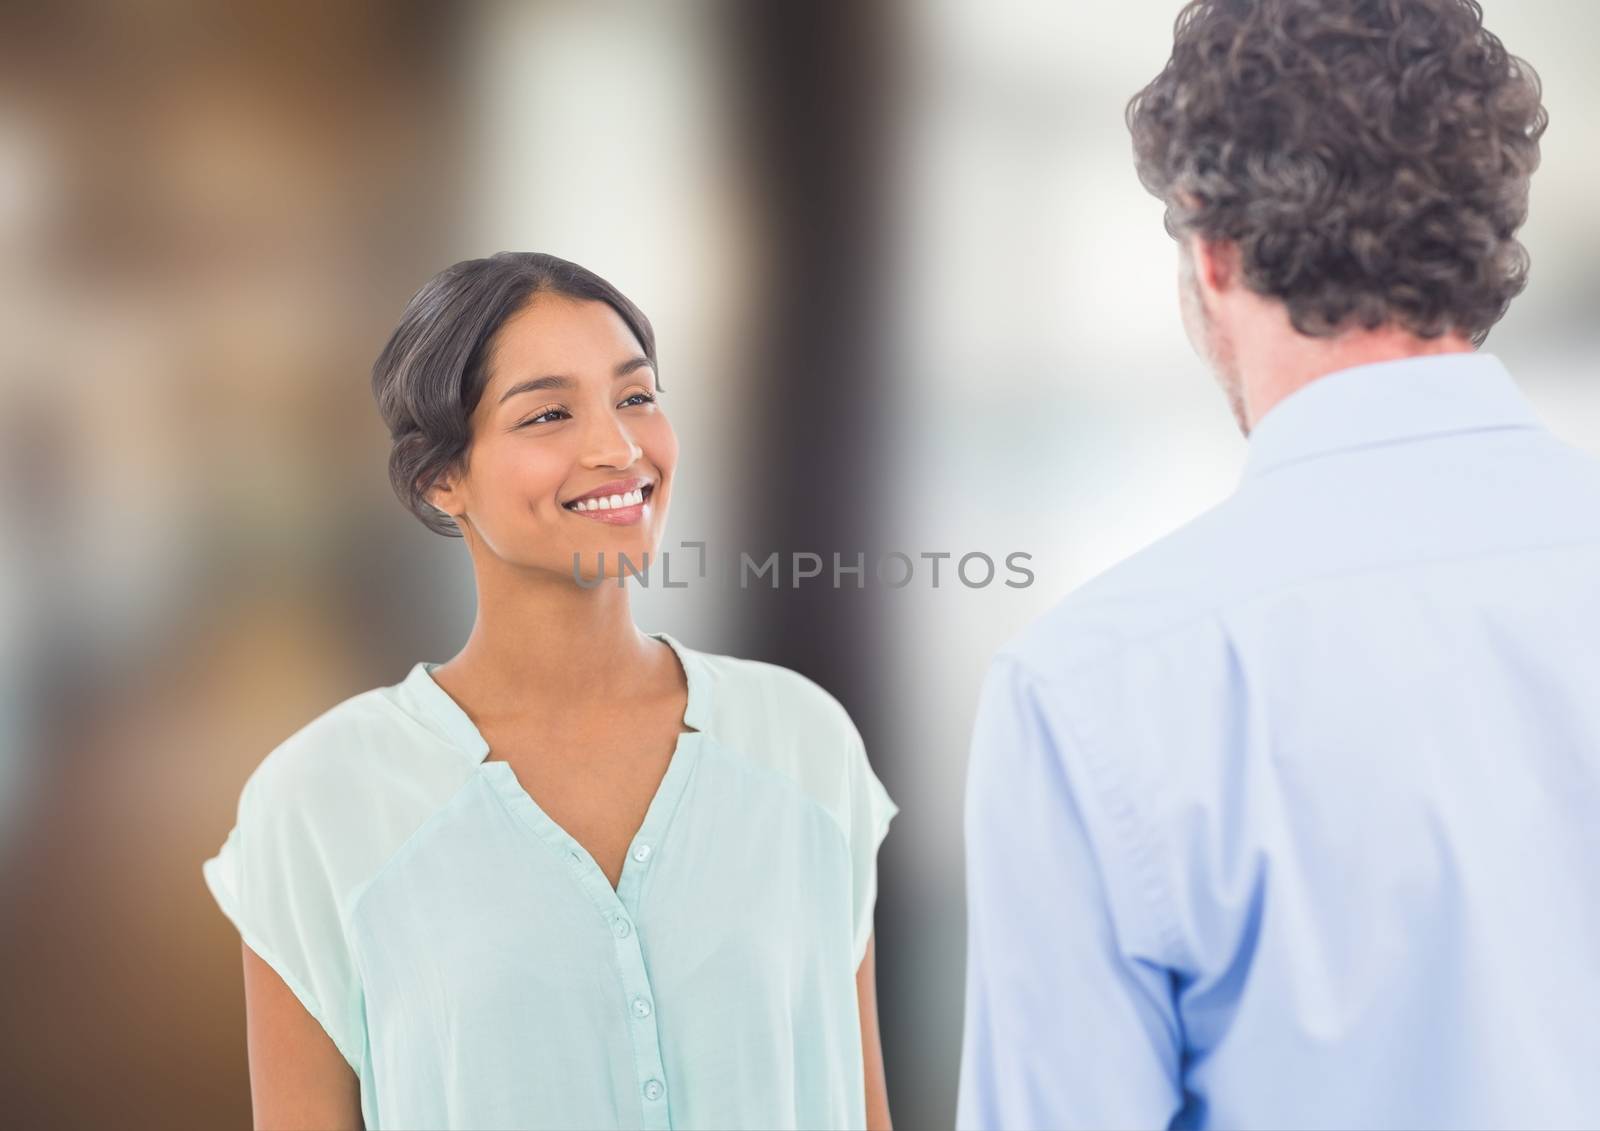 Digital composite of Two people talking to each other